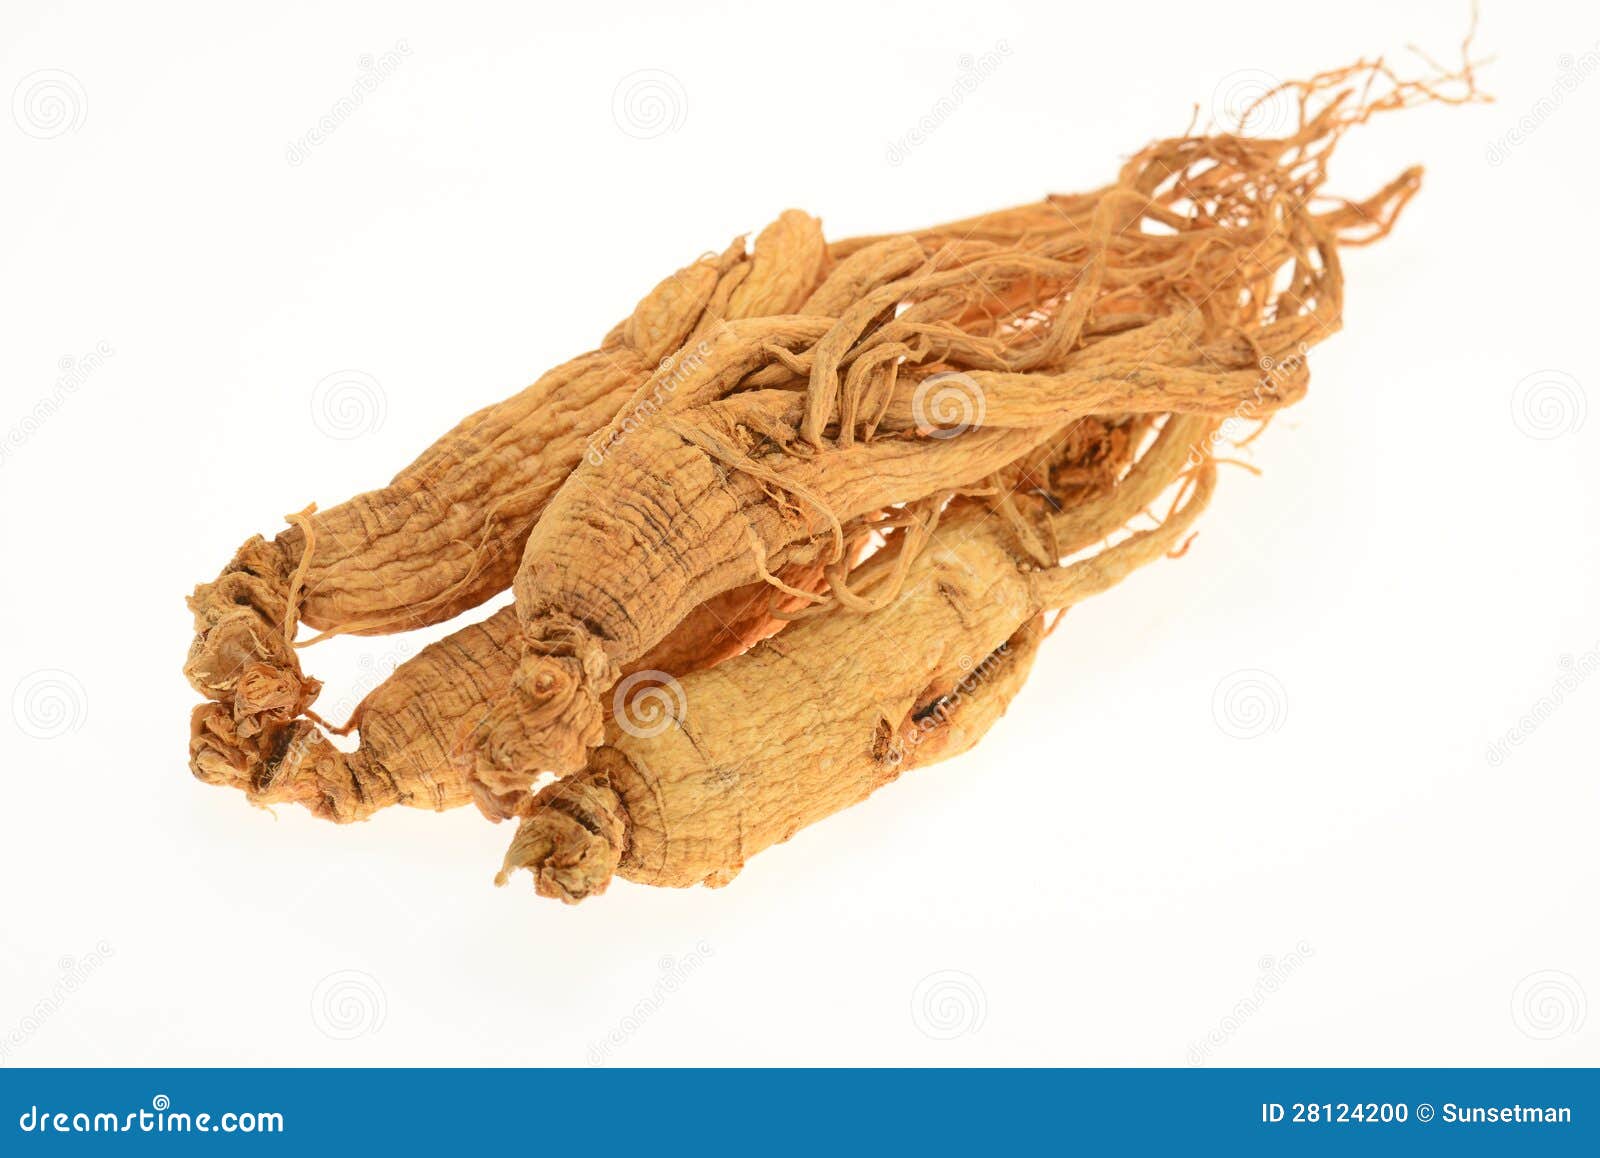 preserved ginseng roots